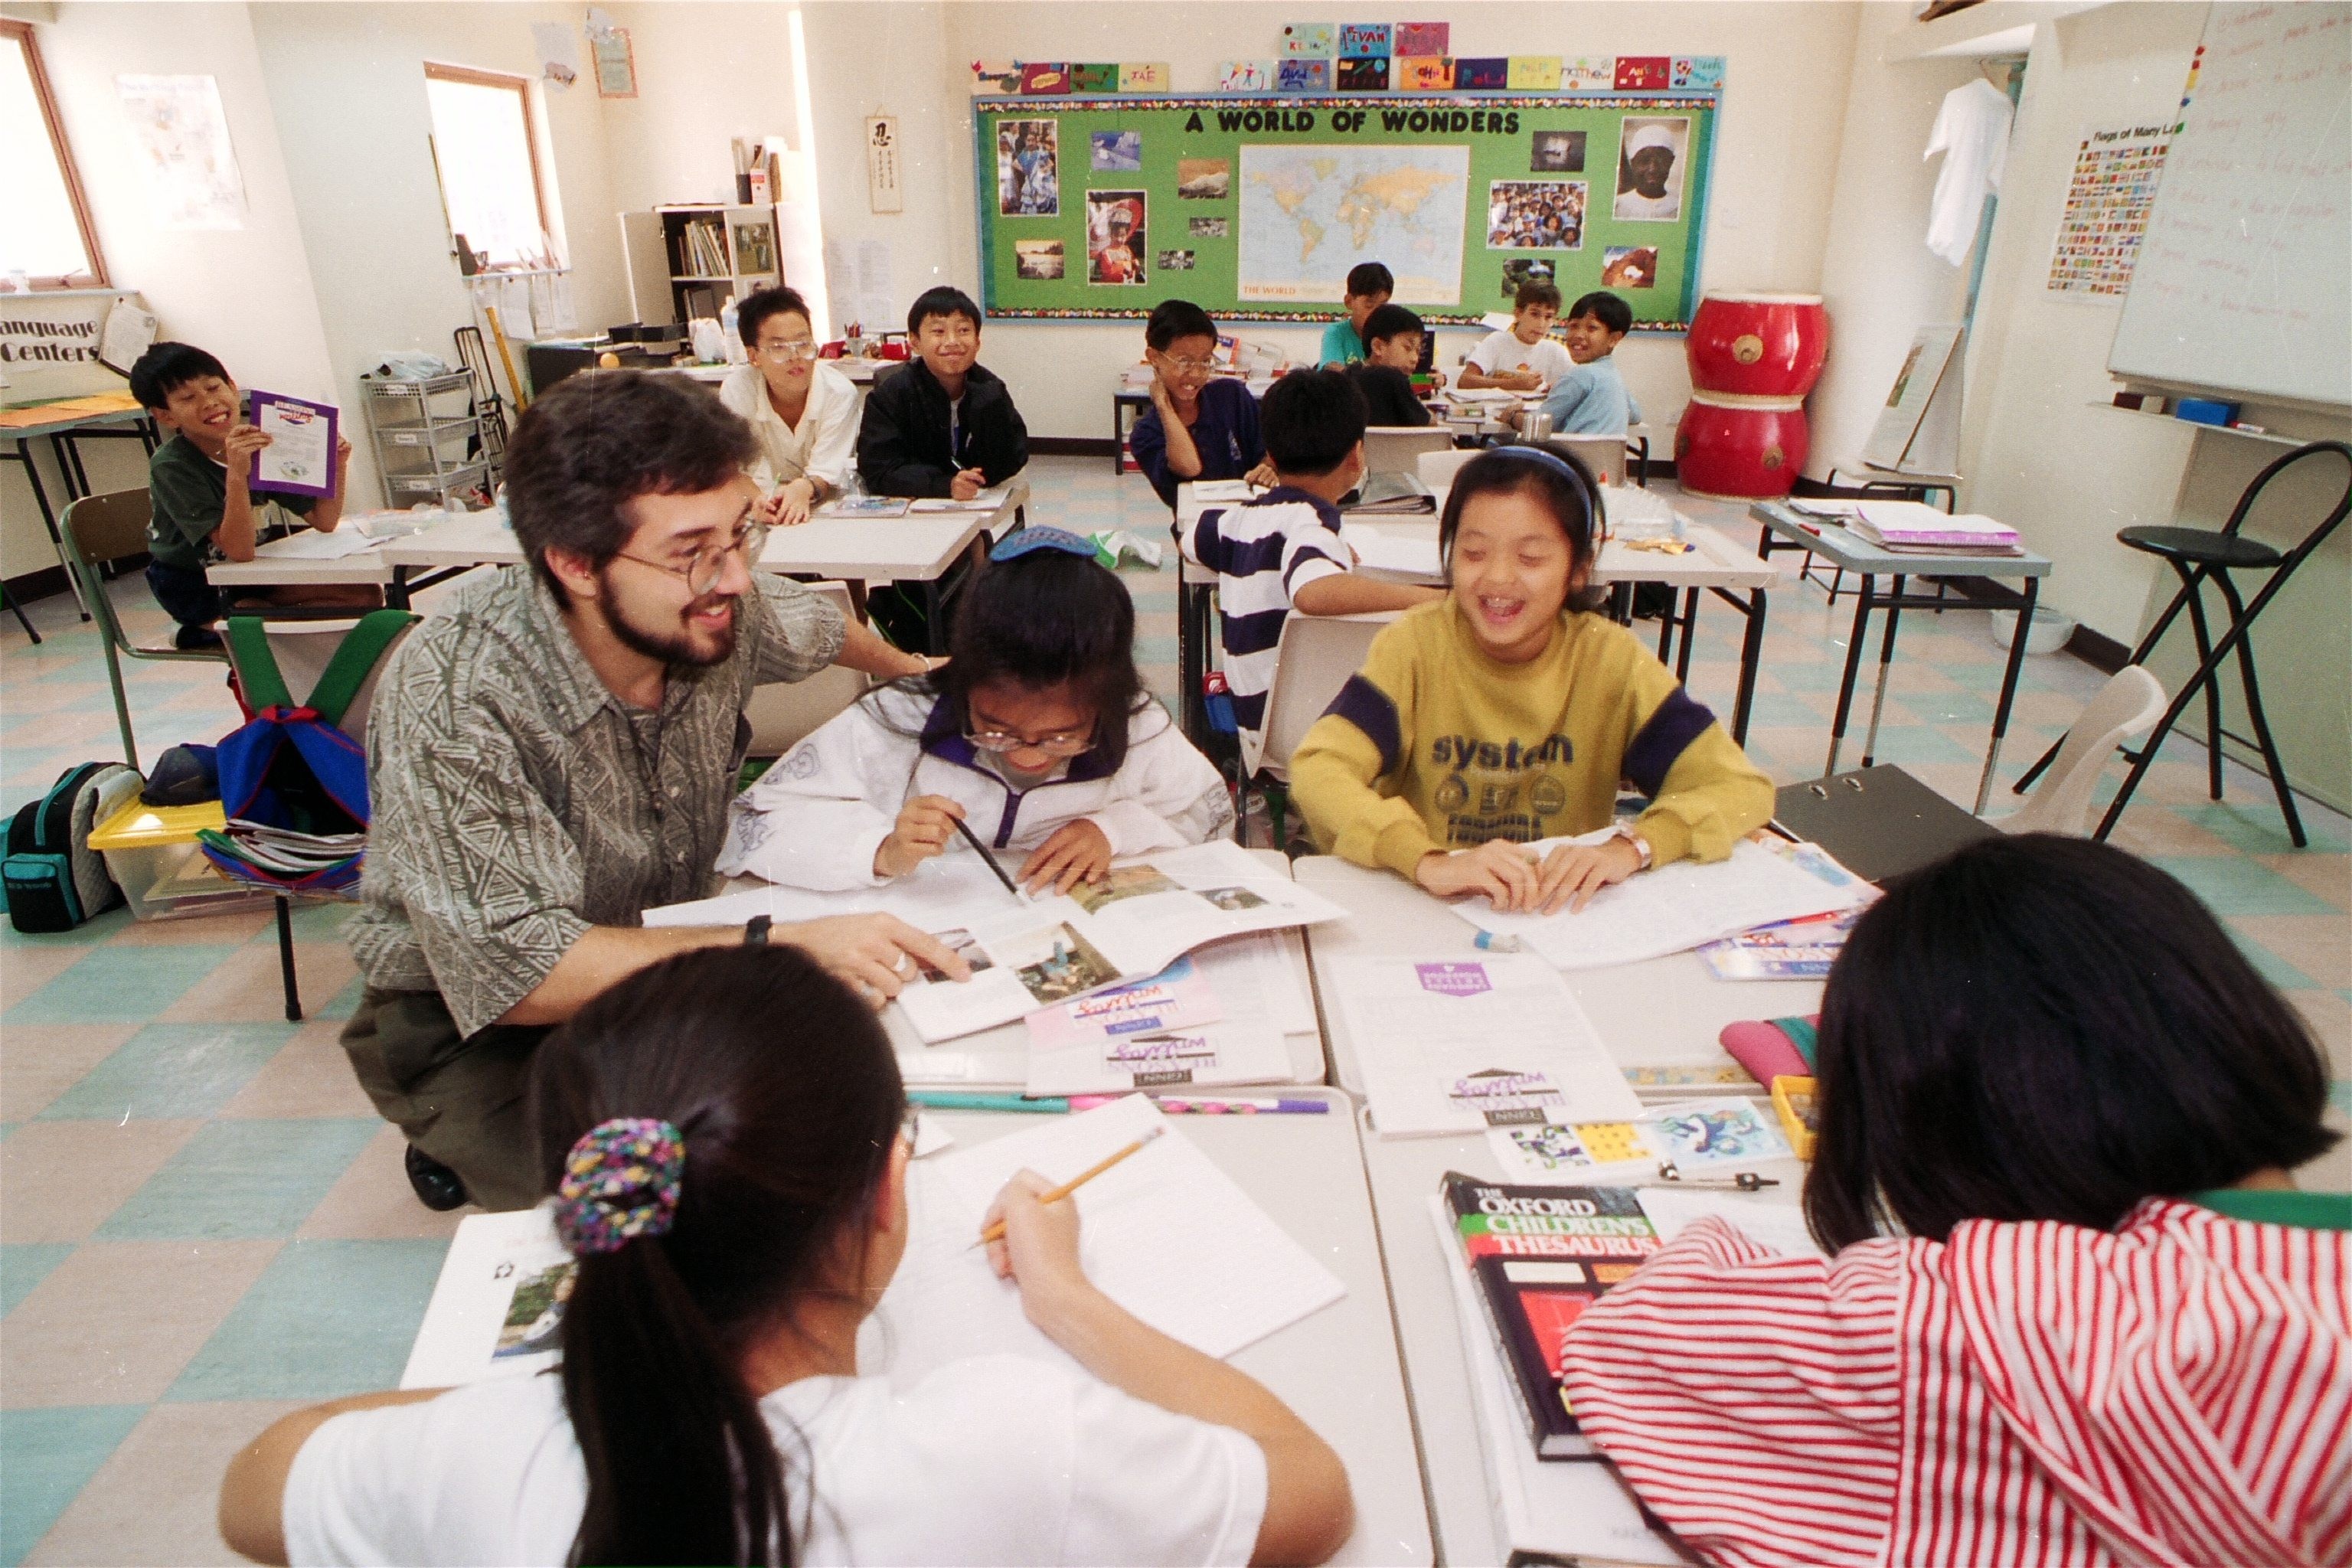 Korean children being taught English by a foreigner. Photo: SCMP